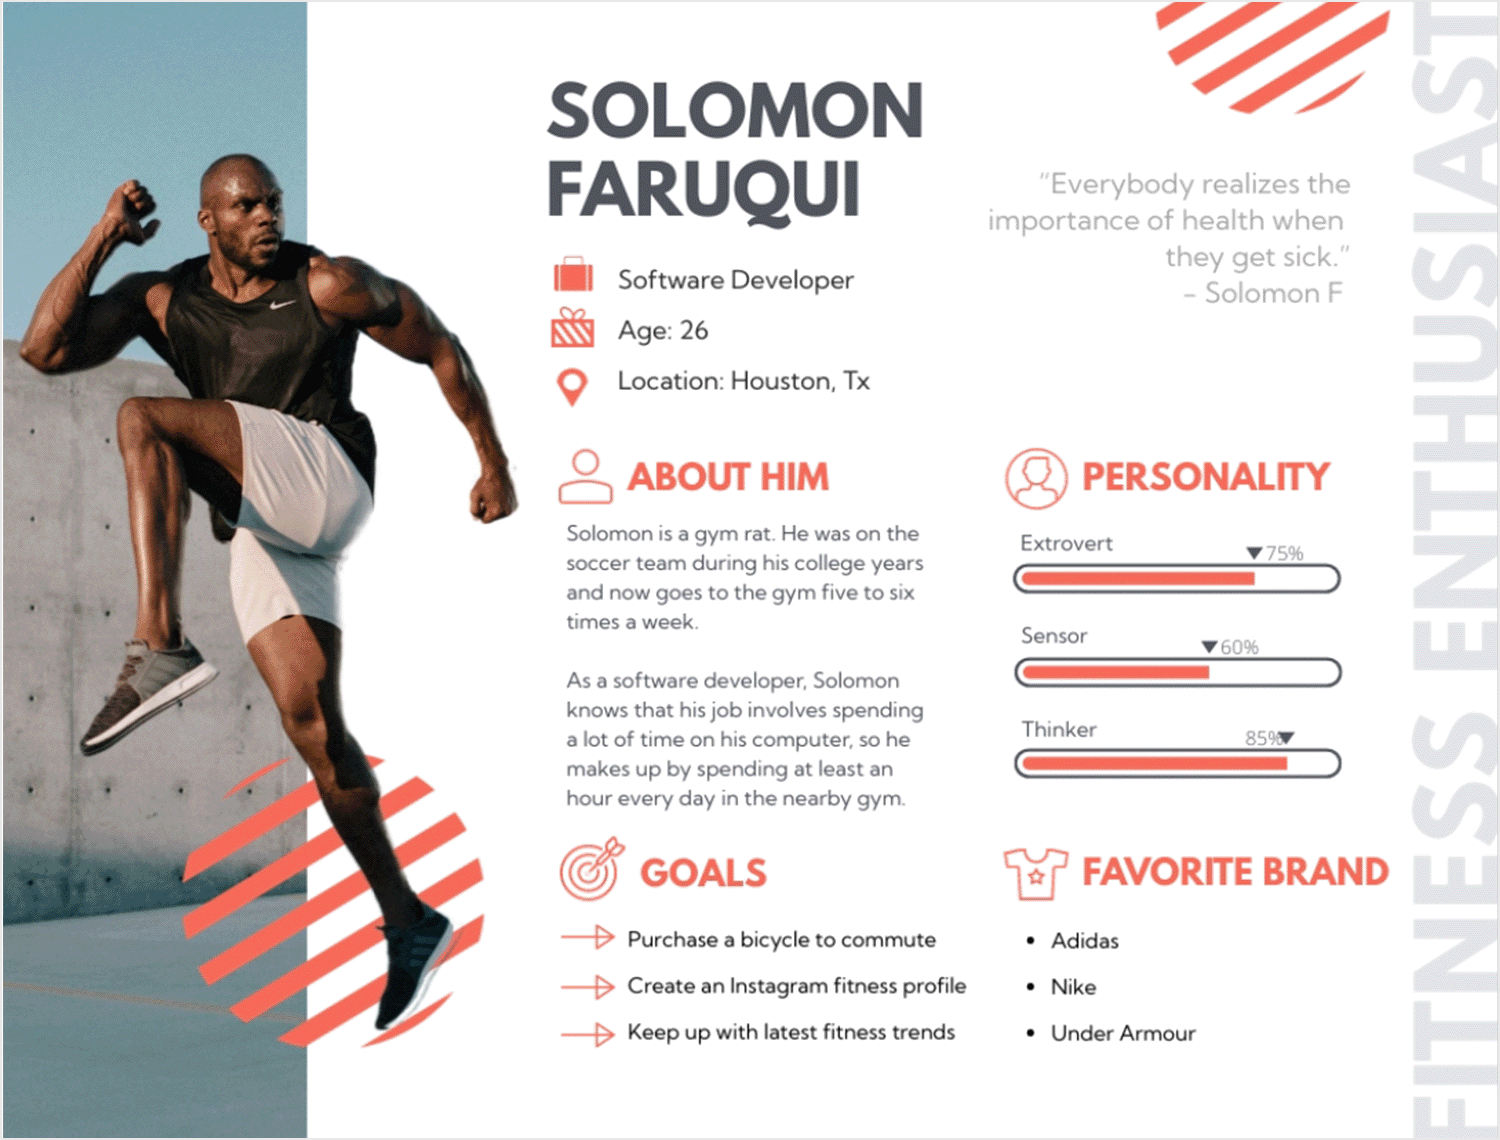 User persona template for Solomon Faruqui, showing his job as a software developer and love for fitness